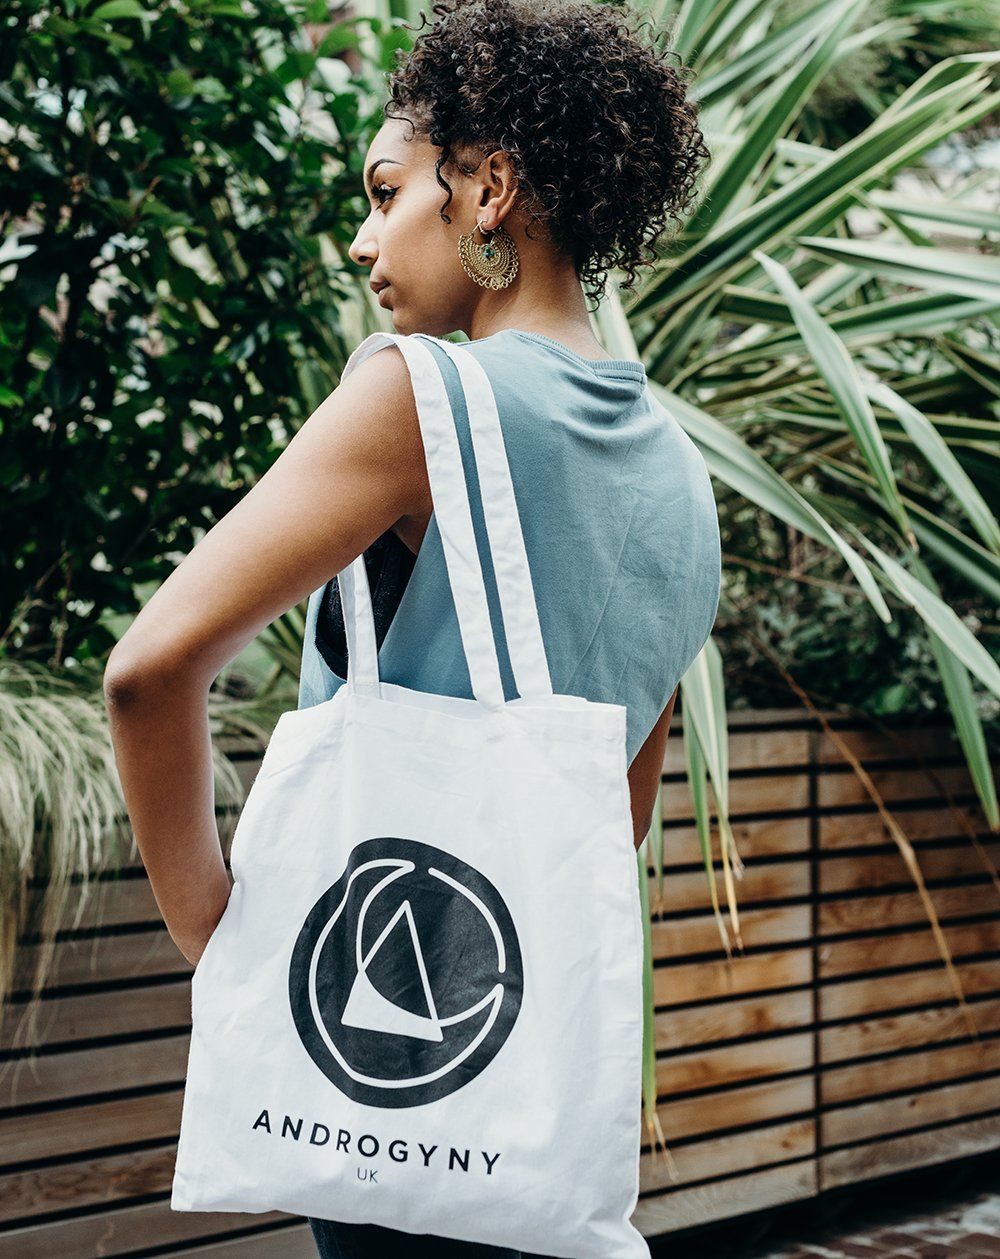 printed tote bag by ethical gender neutral streetwear fashion brand Androgyny UK